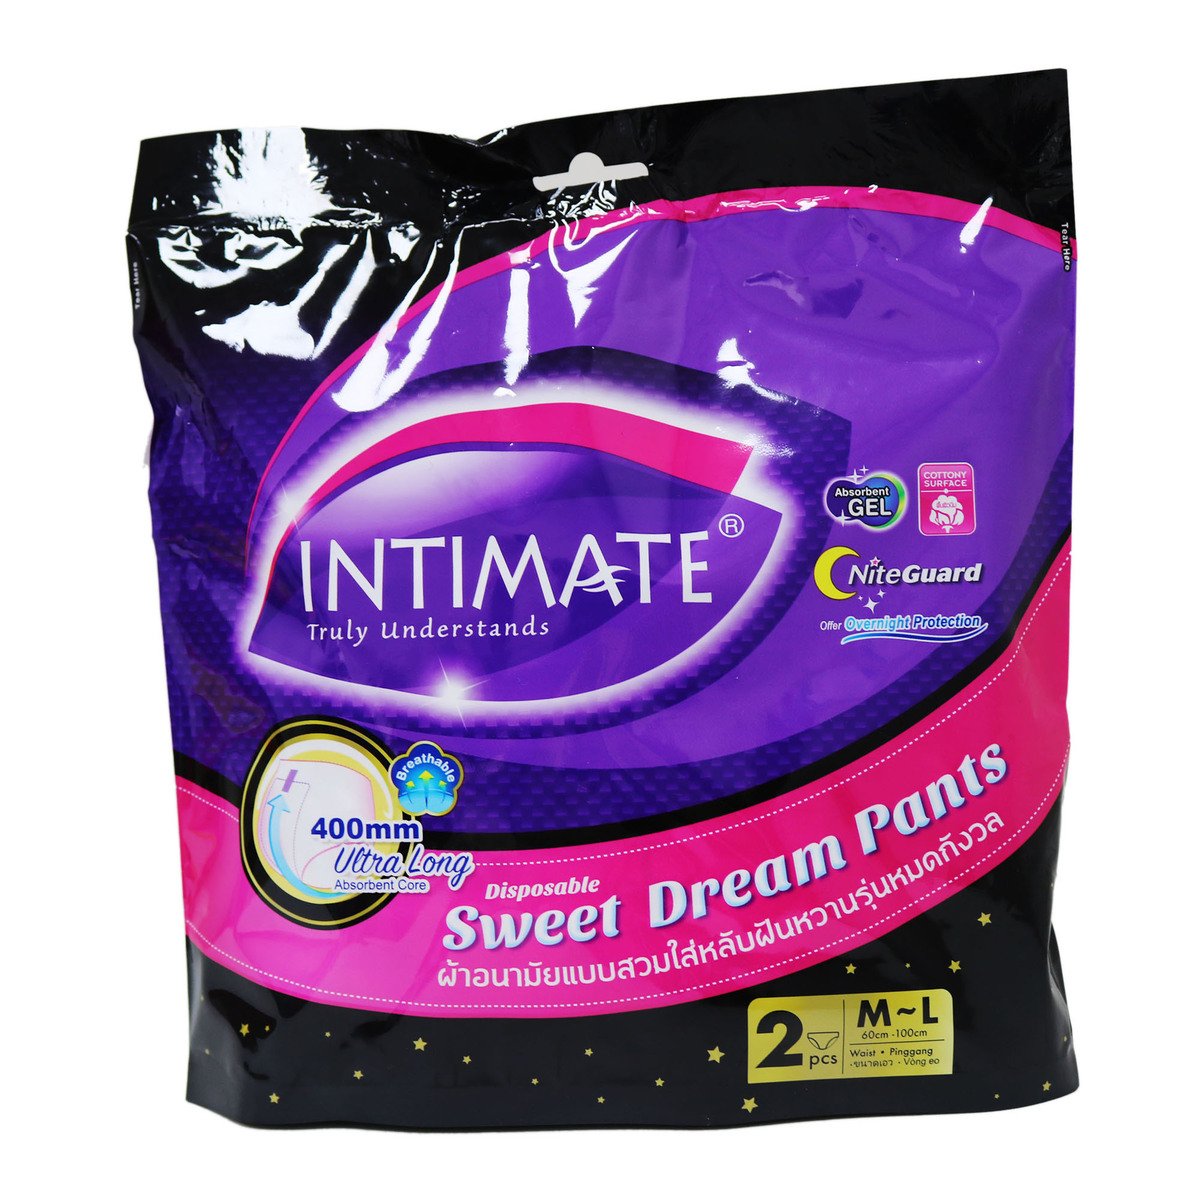 Intimate Sweet Dream Pants 2 Counts